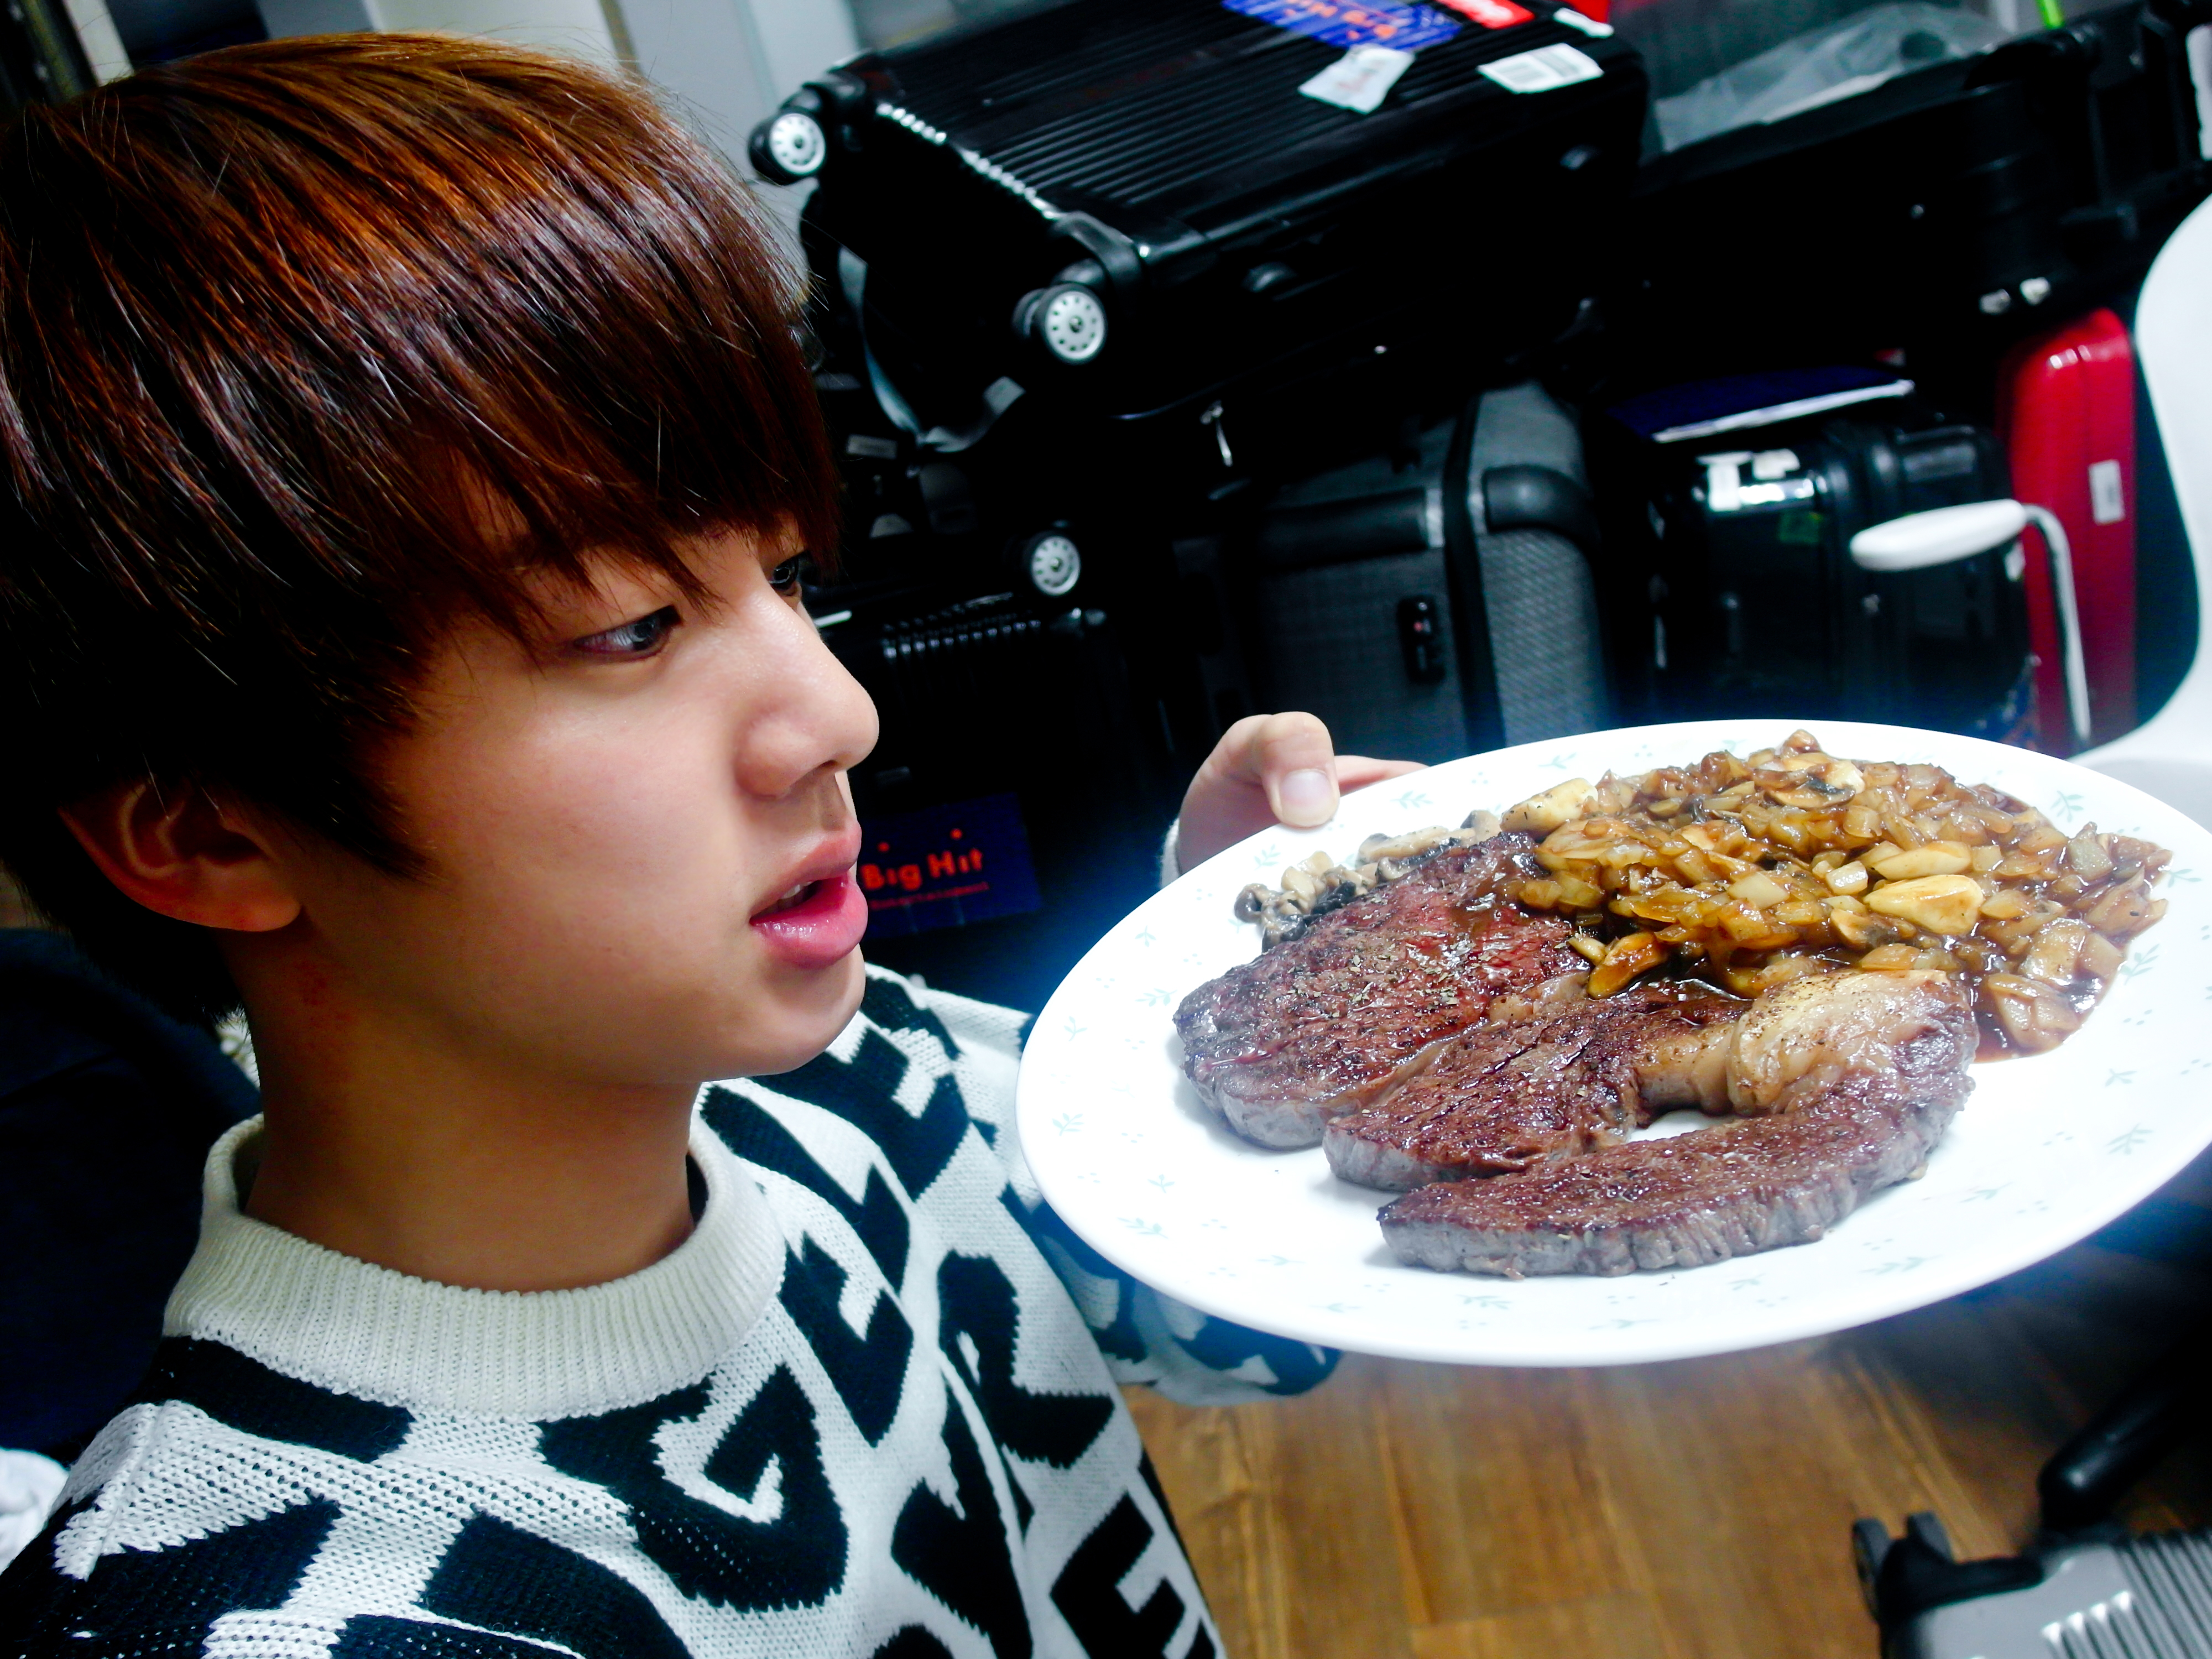 [Blog/Trans] (Jin’s cooking diary) THANKS FATHER FOR THE ALLOWANCE SO I